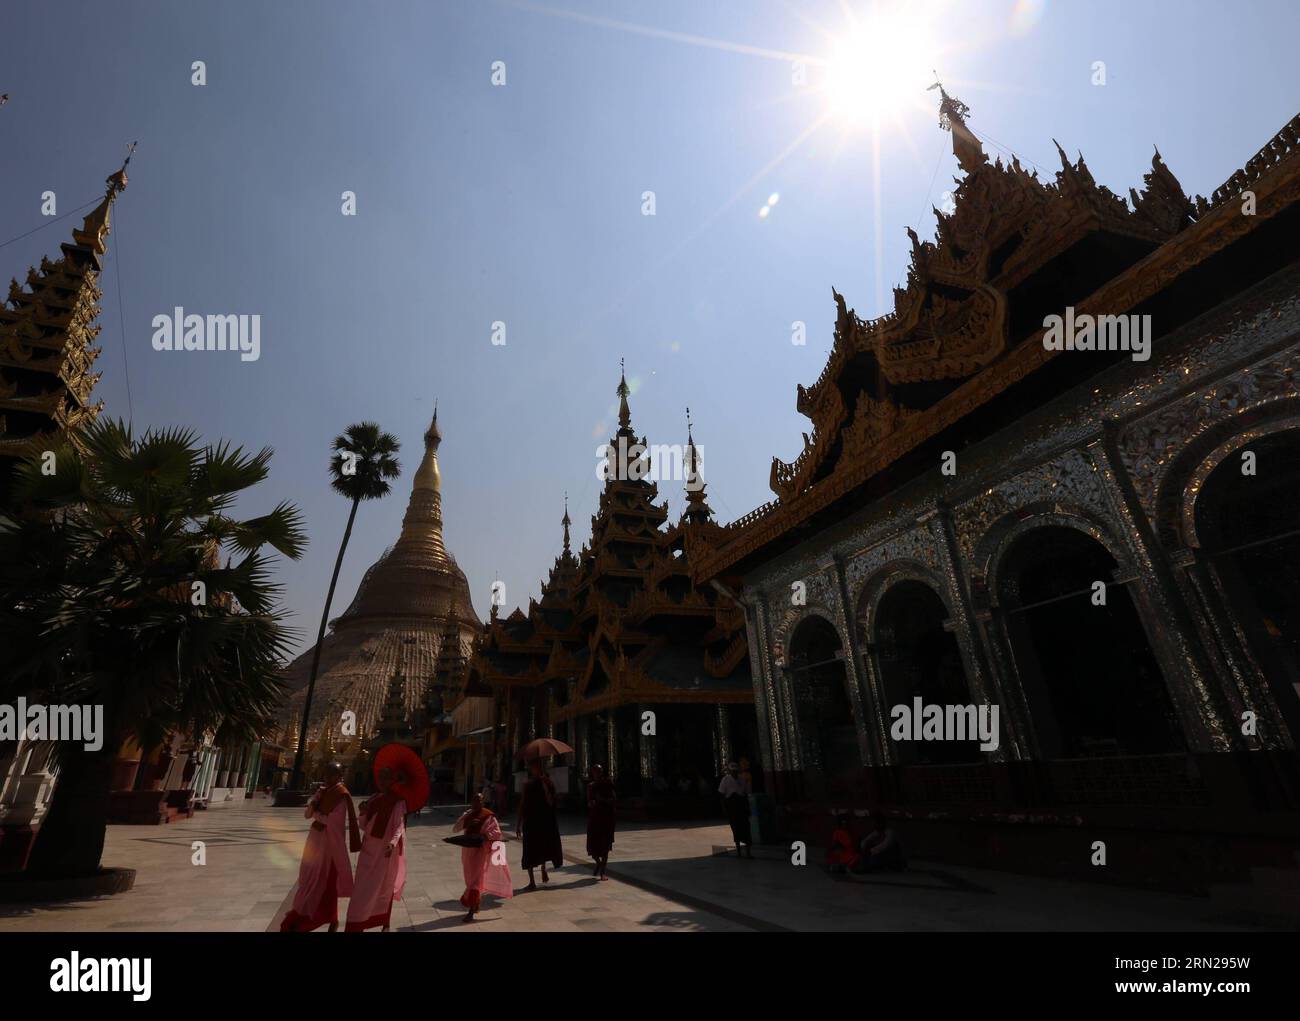 YANGON, Feb. 17, 2015 -- Buddhist monks and nuns visit the Shwedagon pagoda in Yangon, Myanmar, Feb. 17, 2015. Shwedagon Pagoda is a repository of the best of Myanmar s heritages -- architecture, sculpture and arts. It consists of hundreds of colorful temples, stupas and statues that reflect architectural styles spanning almost 2,500 years. ) MYANMAR-YANGON-SHWEDAGON PAGODA UxAung PUBLICATIONxNOTxINxCHN   Yangon Feb 17 2015 Buddhist Monks and Nuns Visit The Shwedagon Pagoda in Yangon Myanmar Feb 17 2015 Shwedagon Pagoda IS a repository of The Best of Myanmar S heritage Architecture Sculpture a Stock Photo